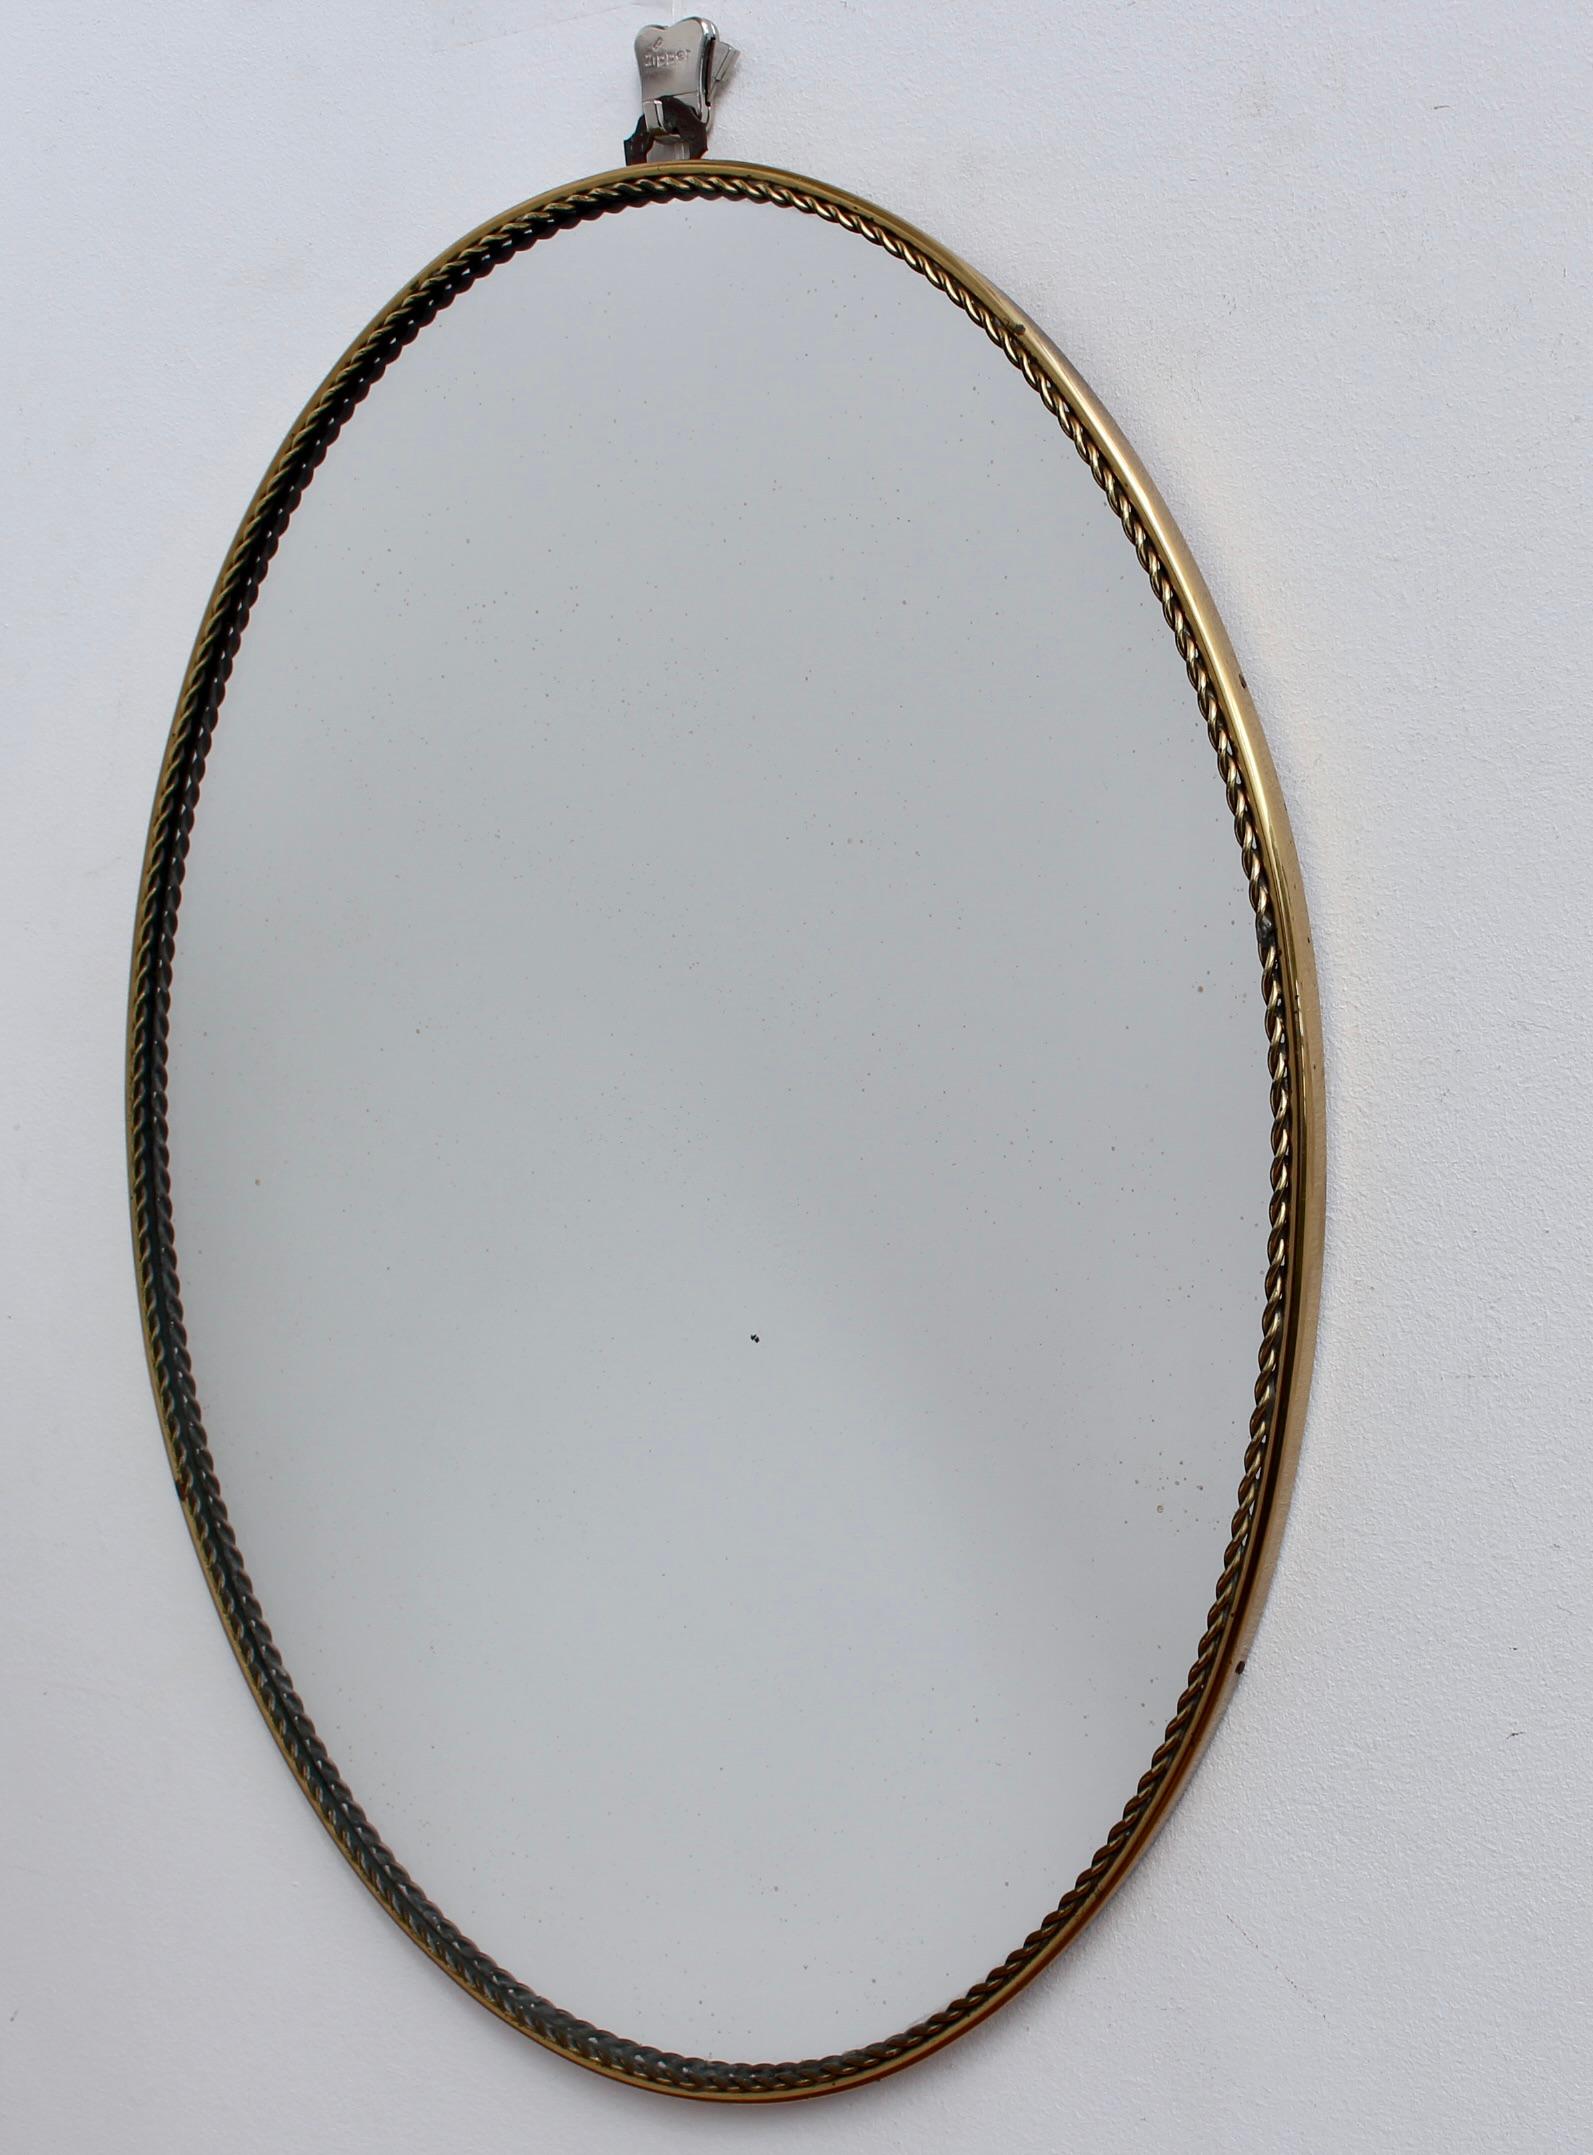 Vintage Italian Oval Wall Mirror in Brass Frame (circa 1950s) - Small 1